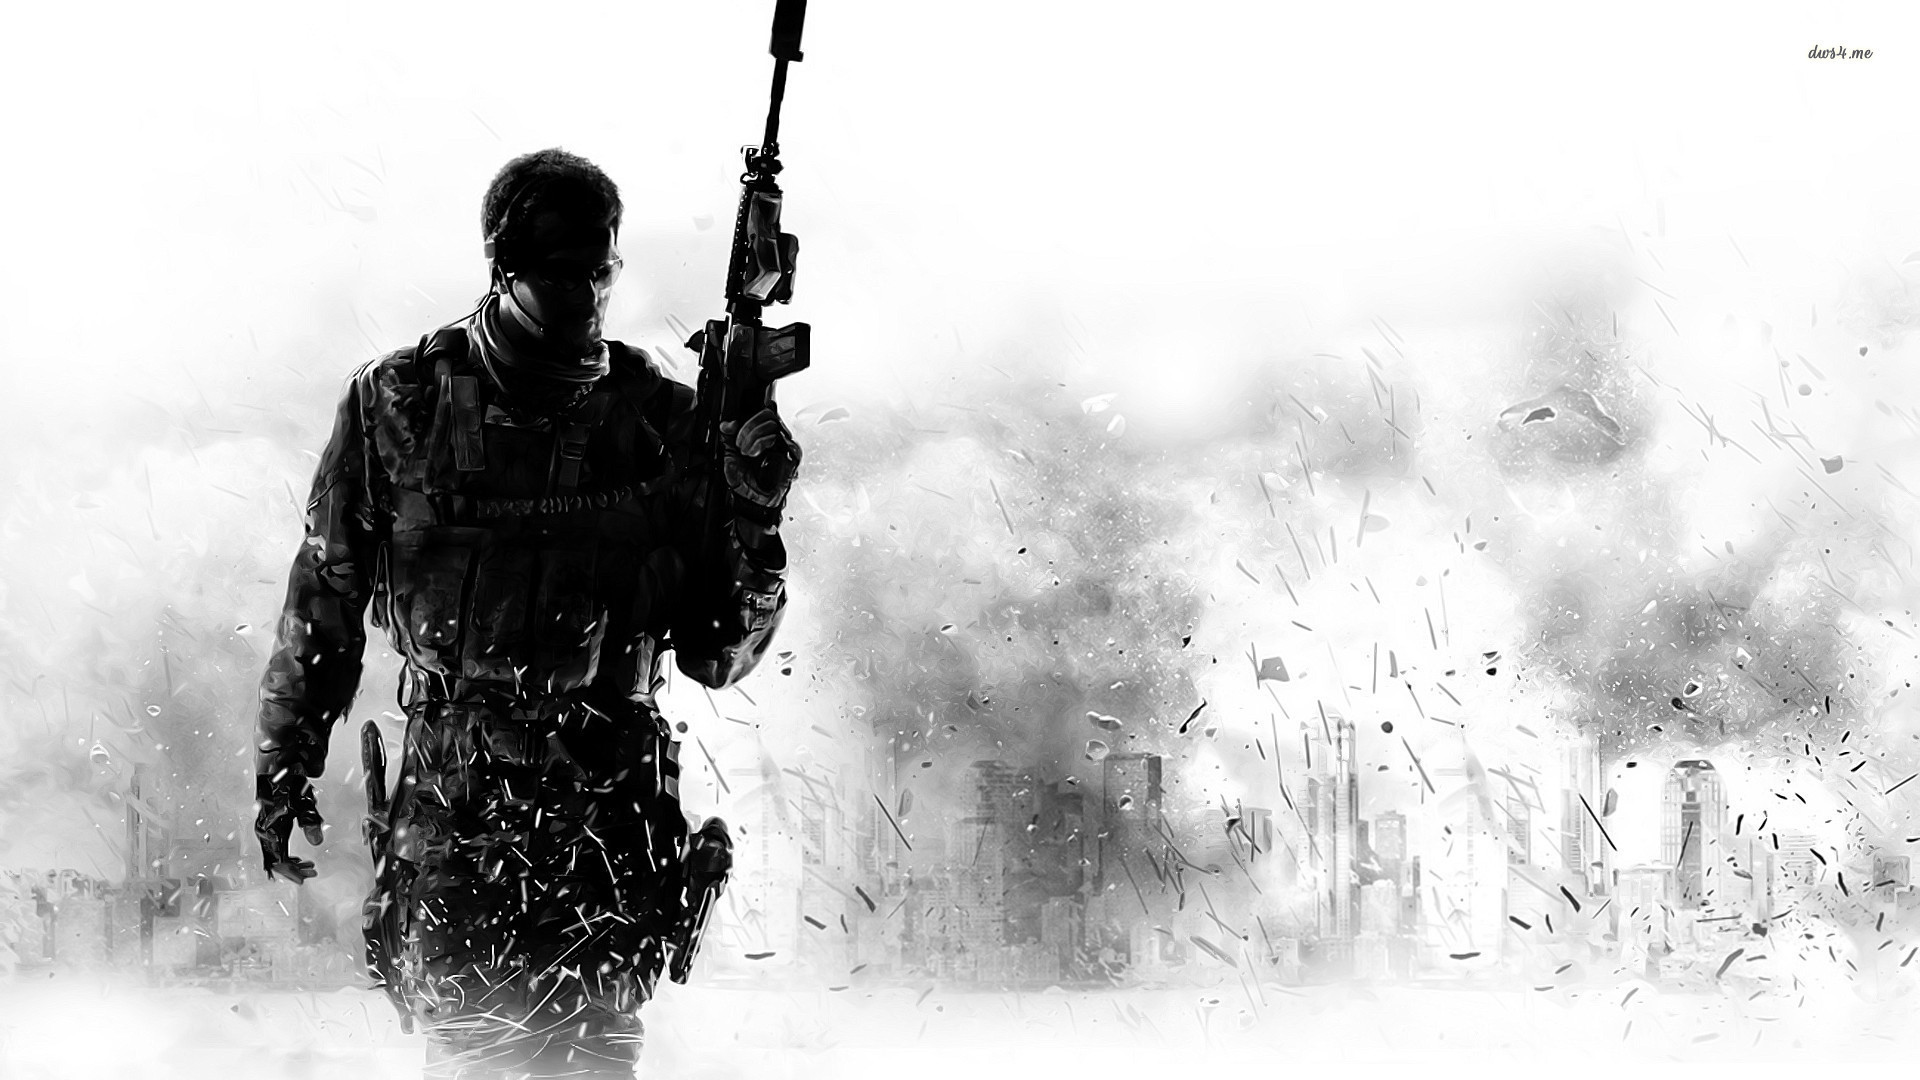 call of duty wallpaper 1920x1080,musical instrument,black and white,photography,soldier,monochrome